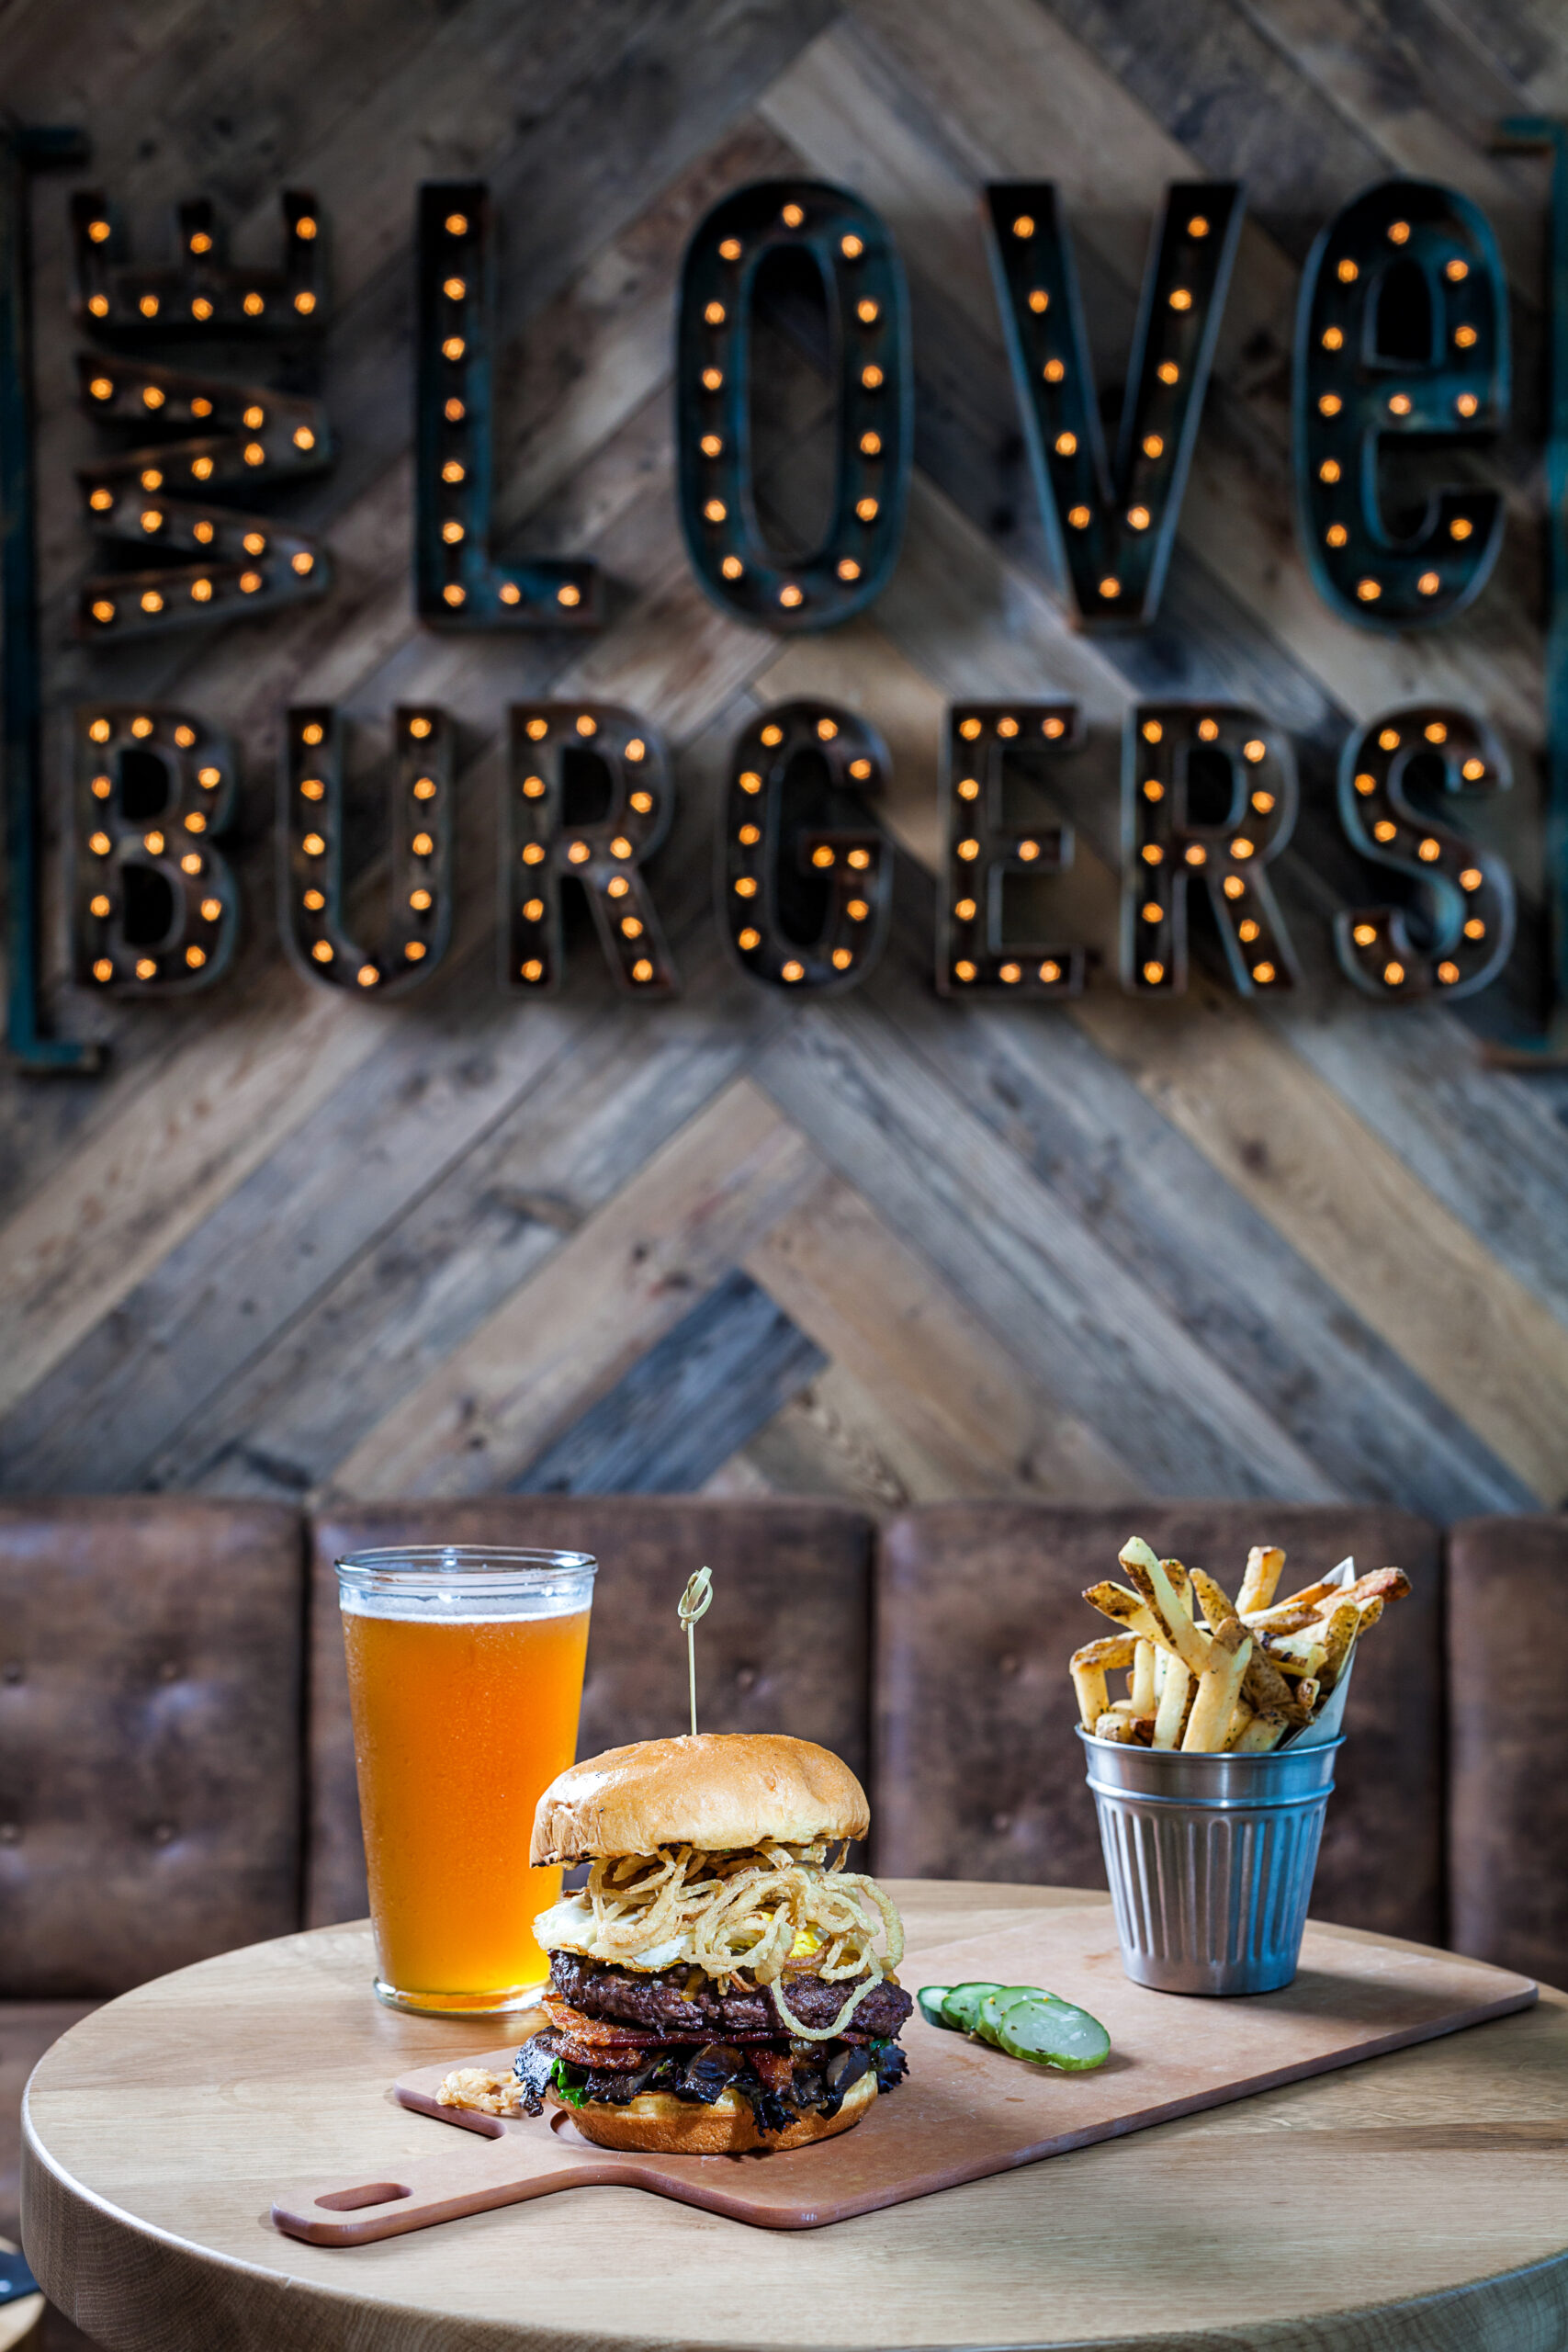 The love burgers is a burger joint in san diego, california.